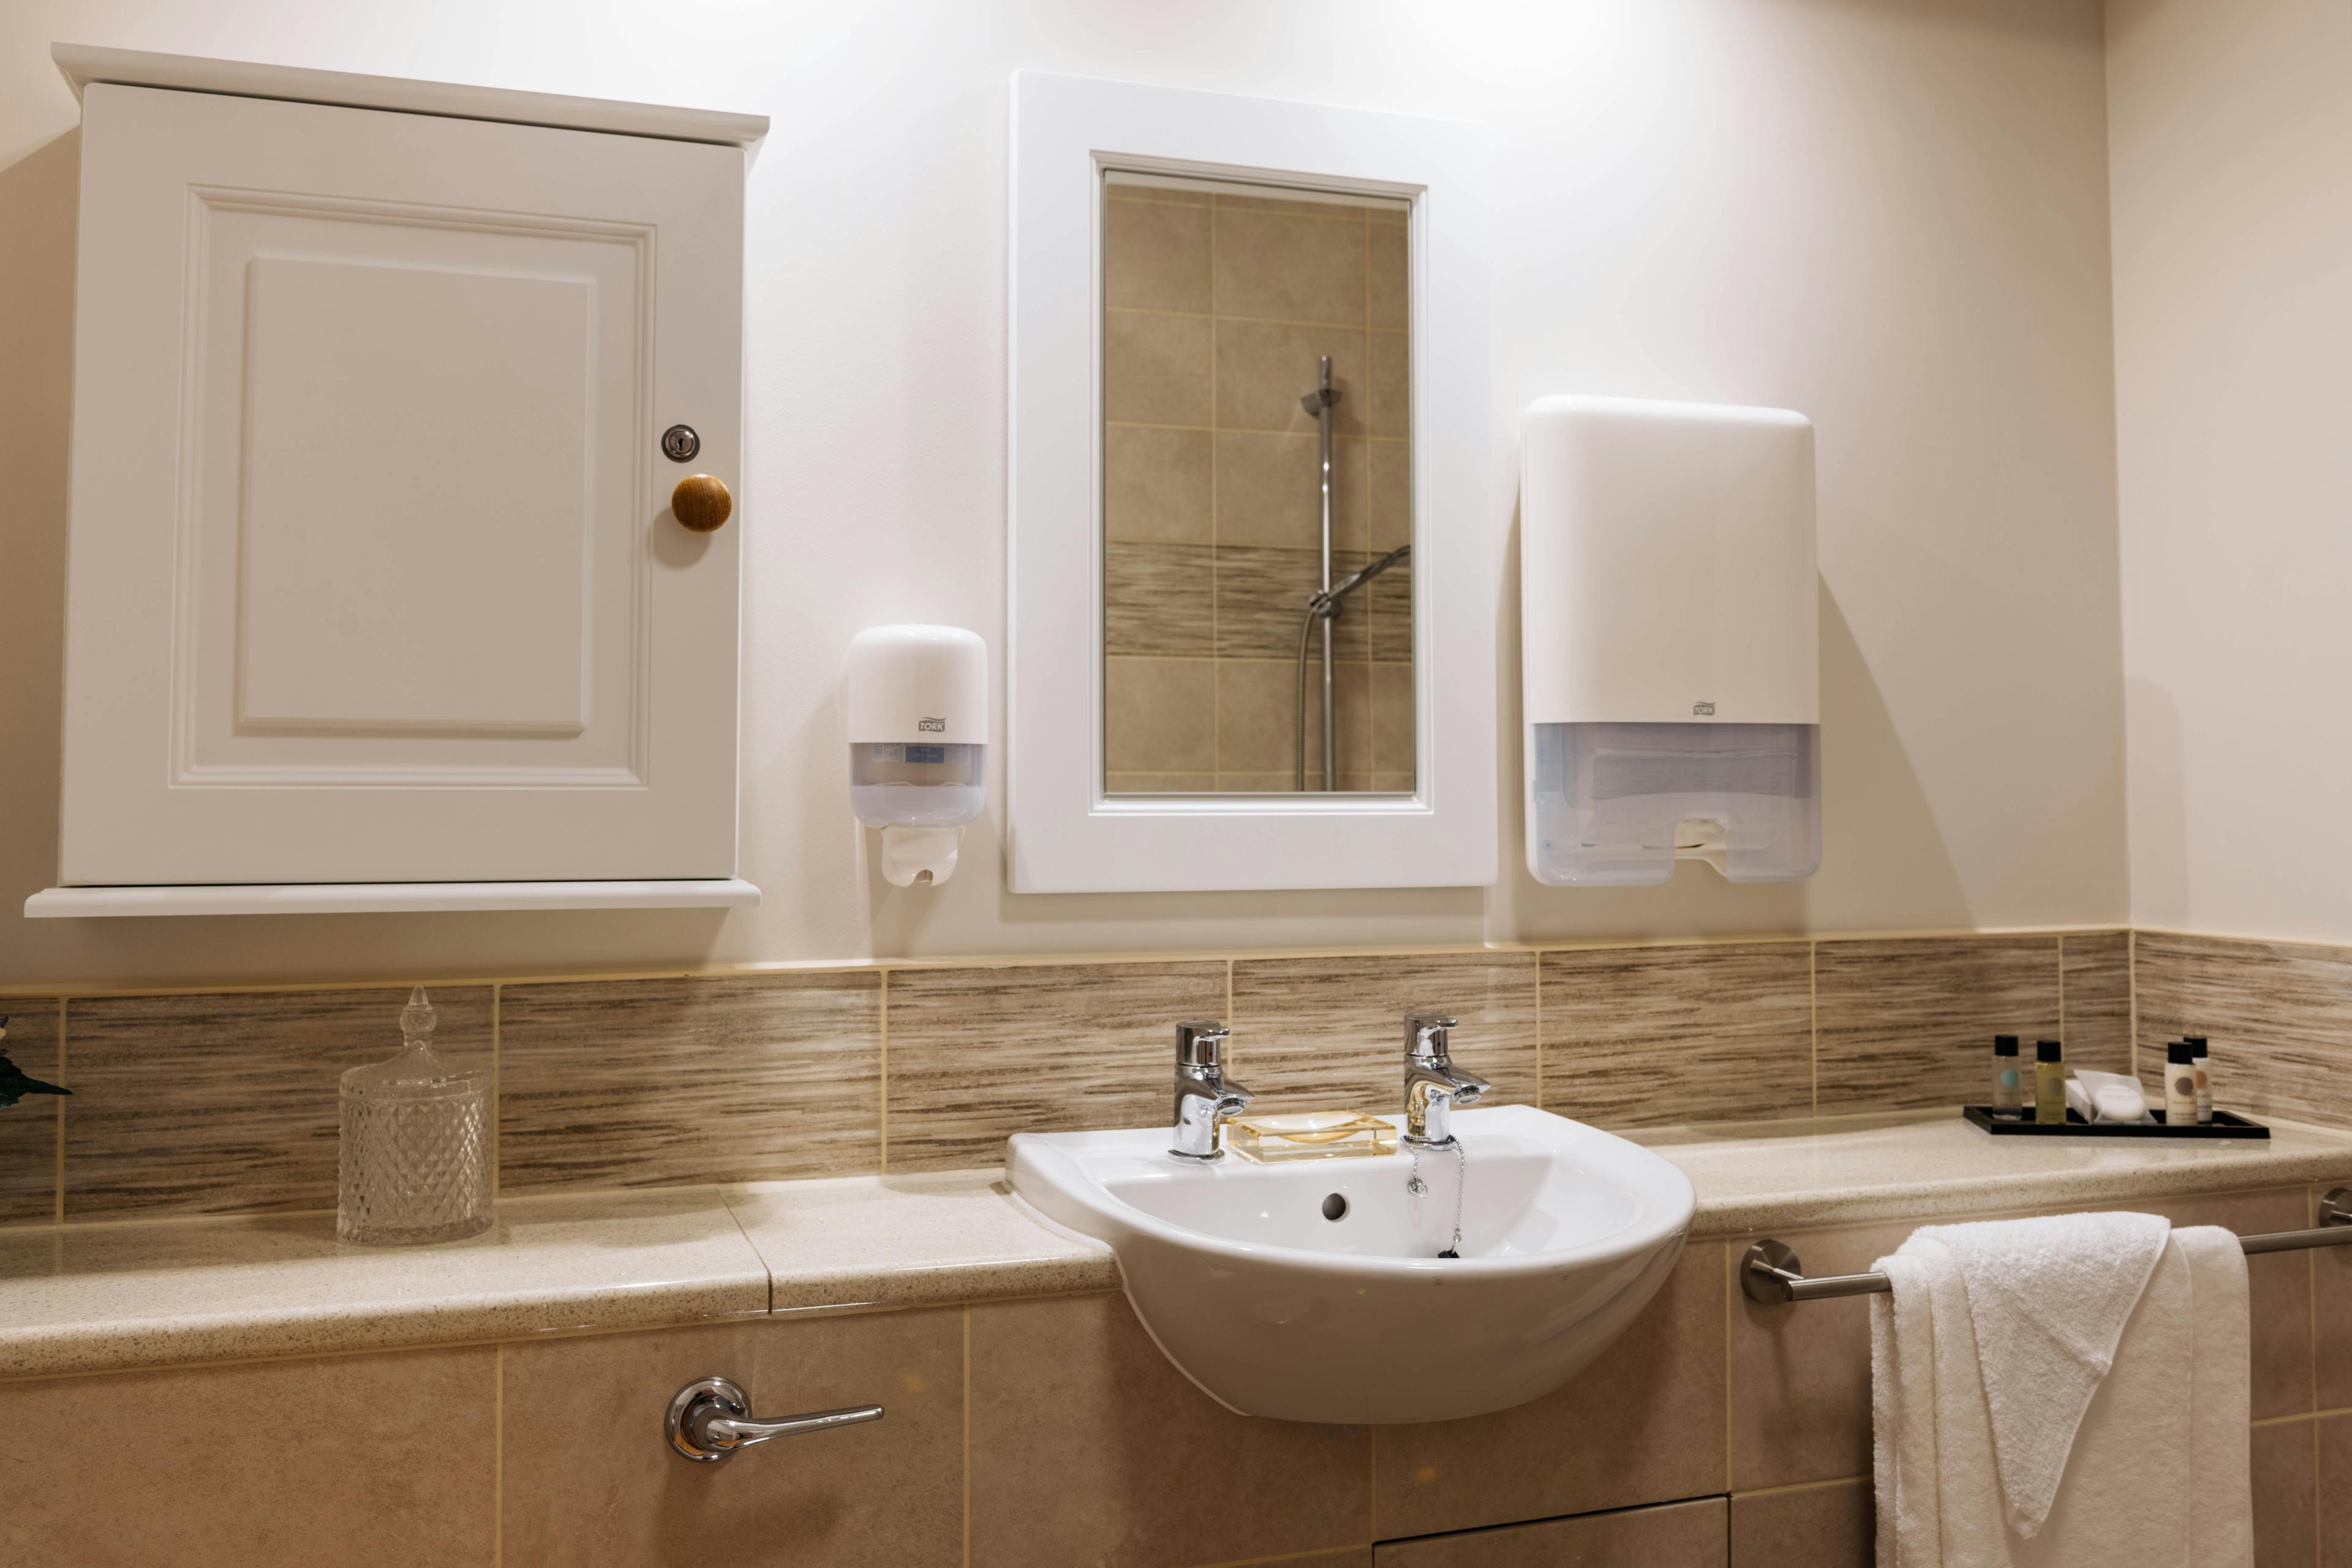 Bathroom at Lydfords Care Home in Lewes, East Sussex